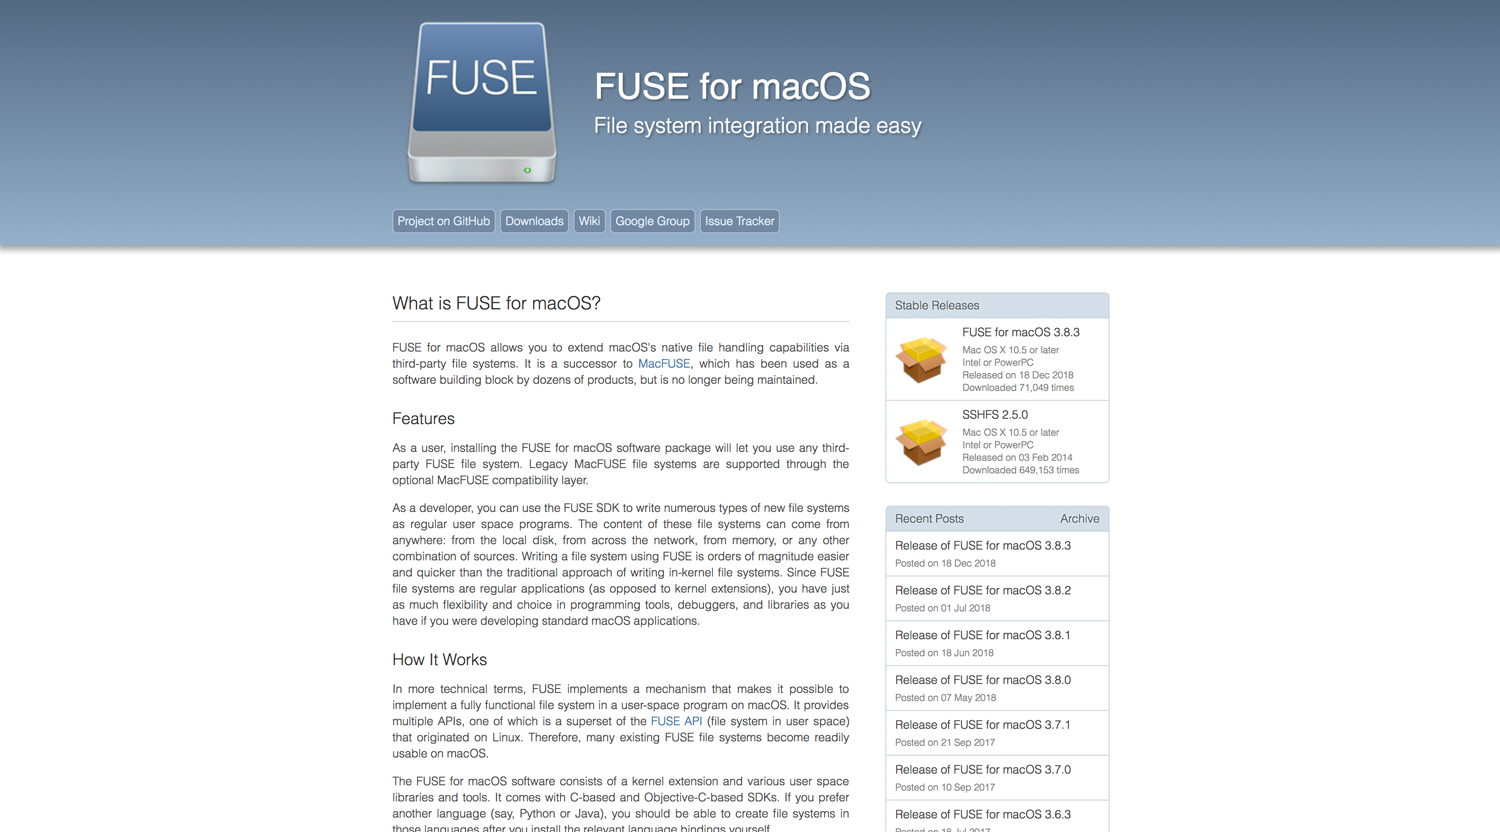 A screenshot of the FUSE for macOS site.